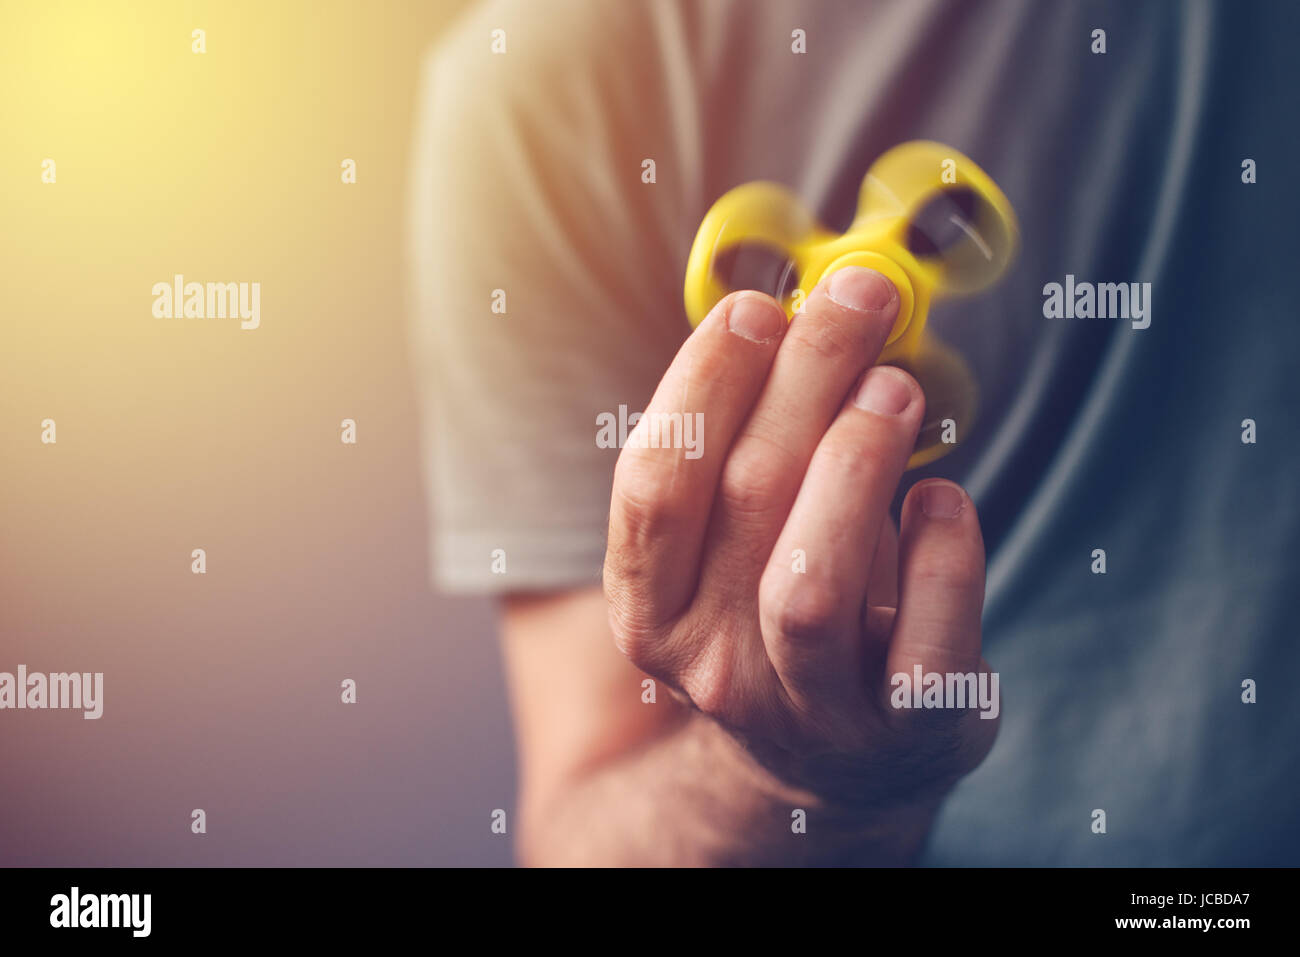 Adult man playing with fidget spinner toy, selective focus Stock Photo